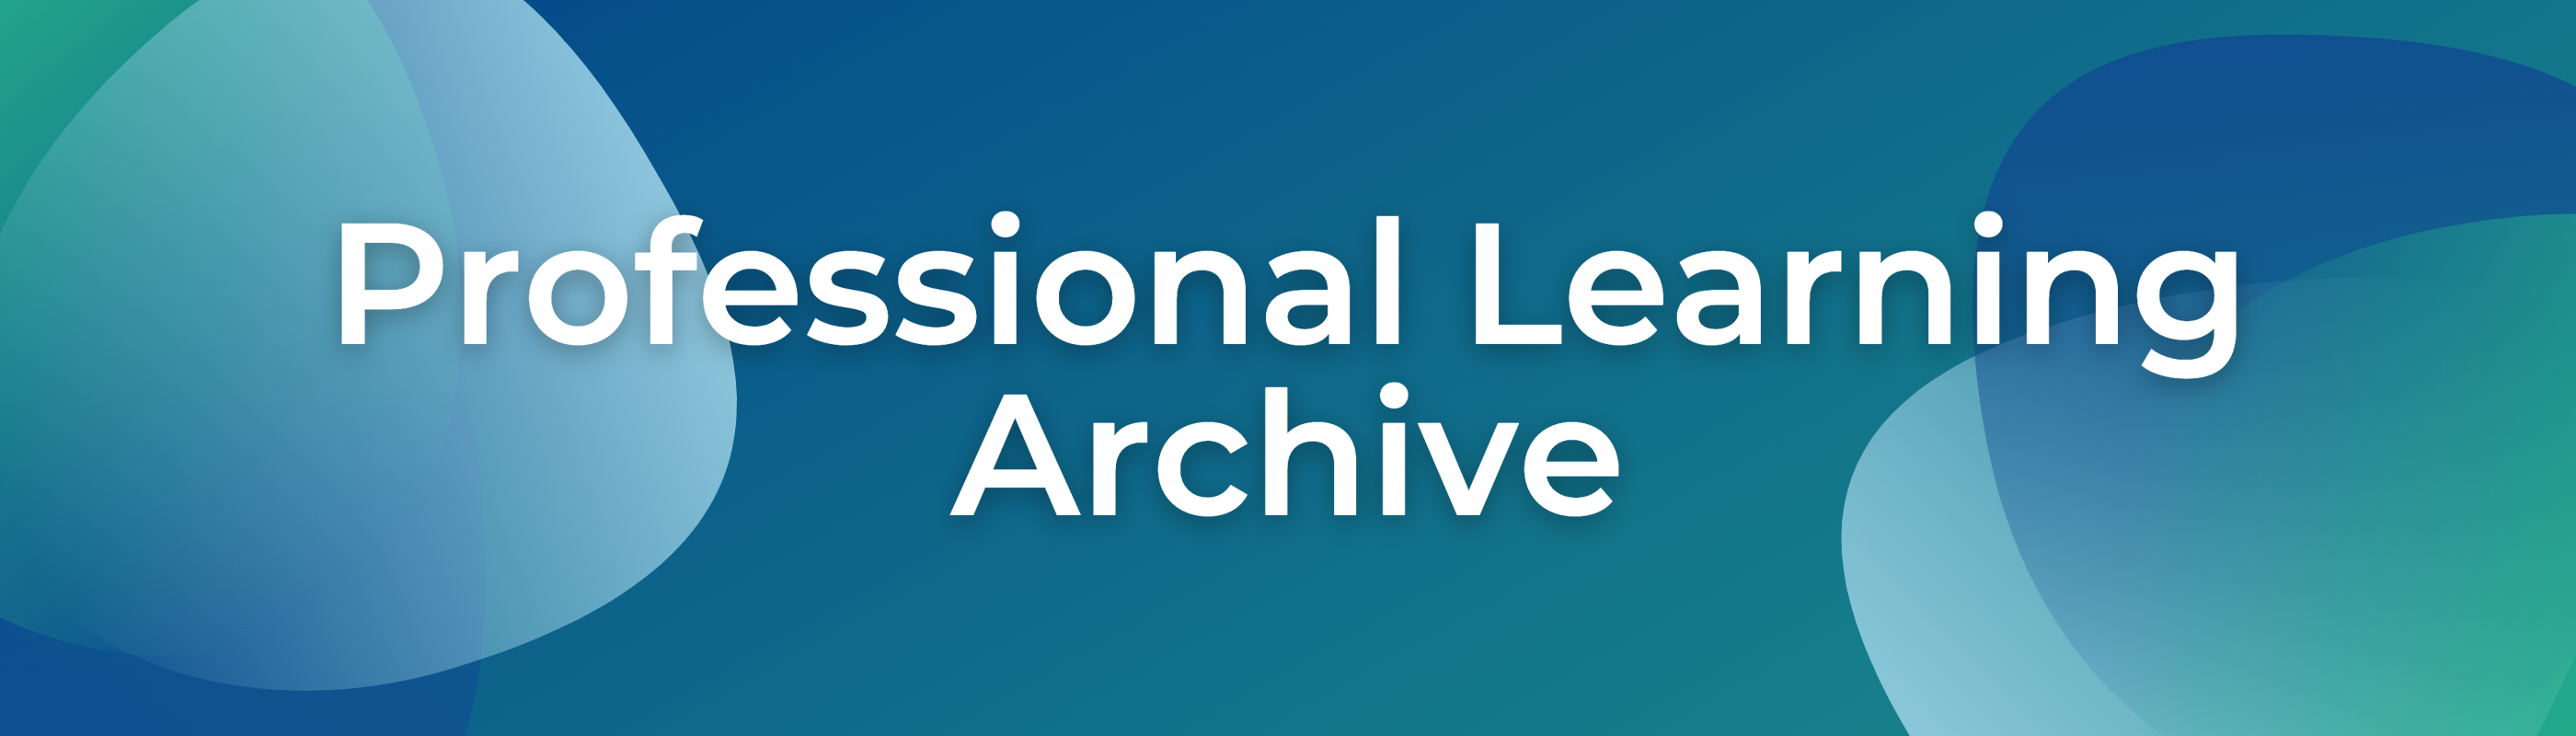 Professional Learning Archive